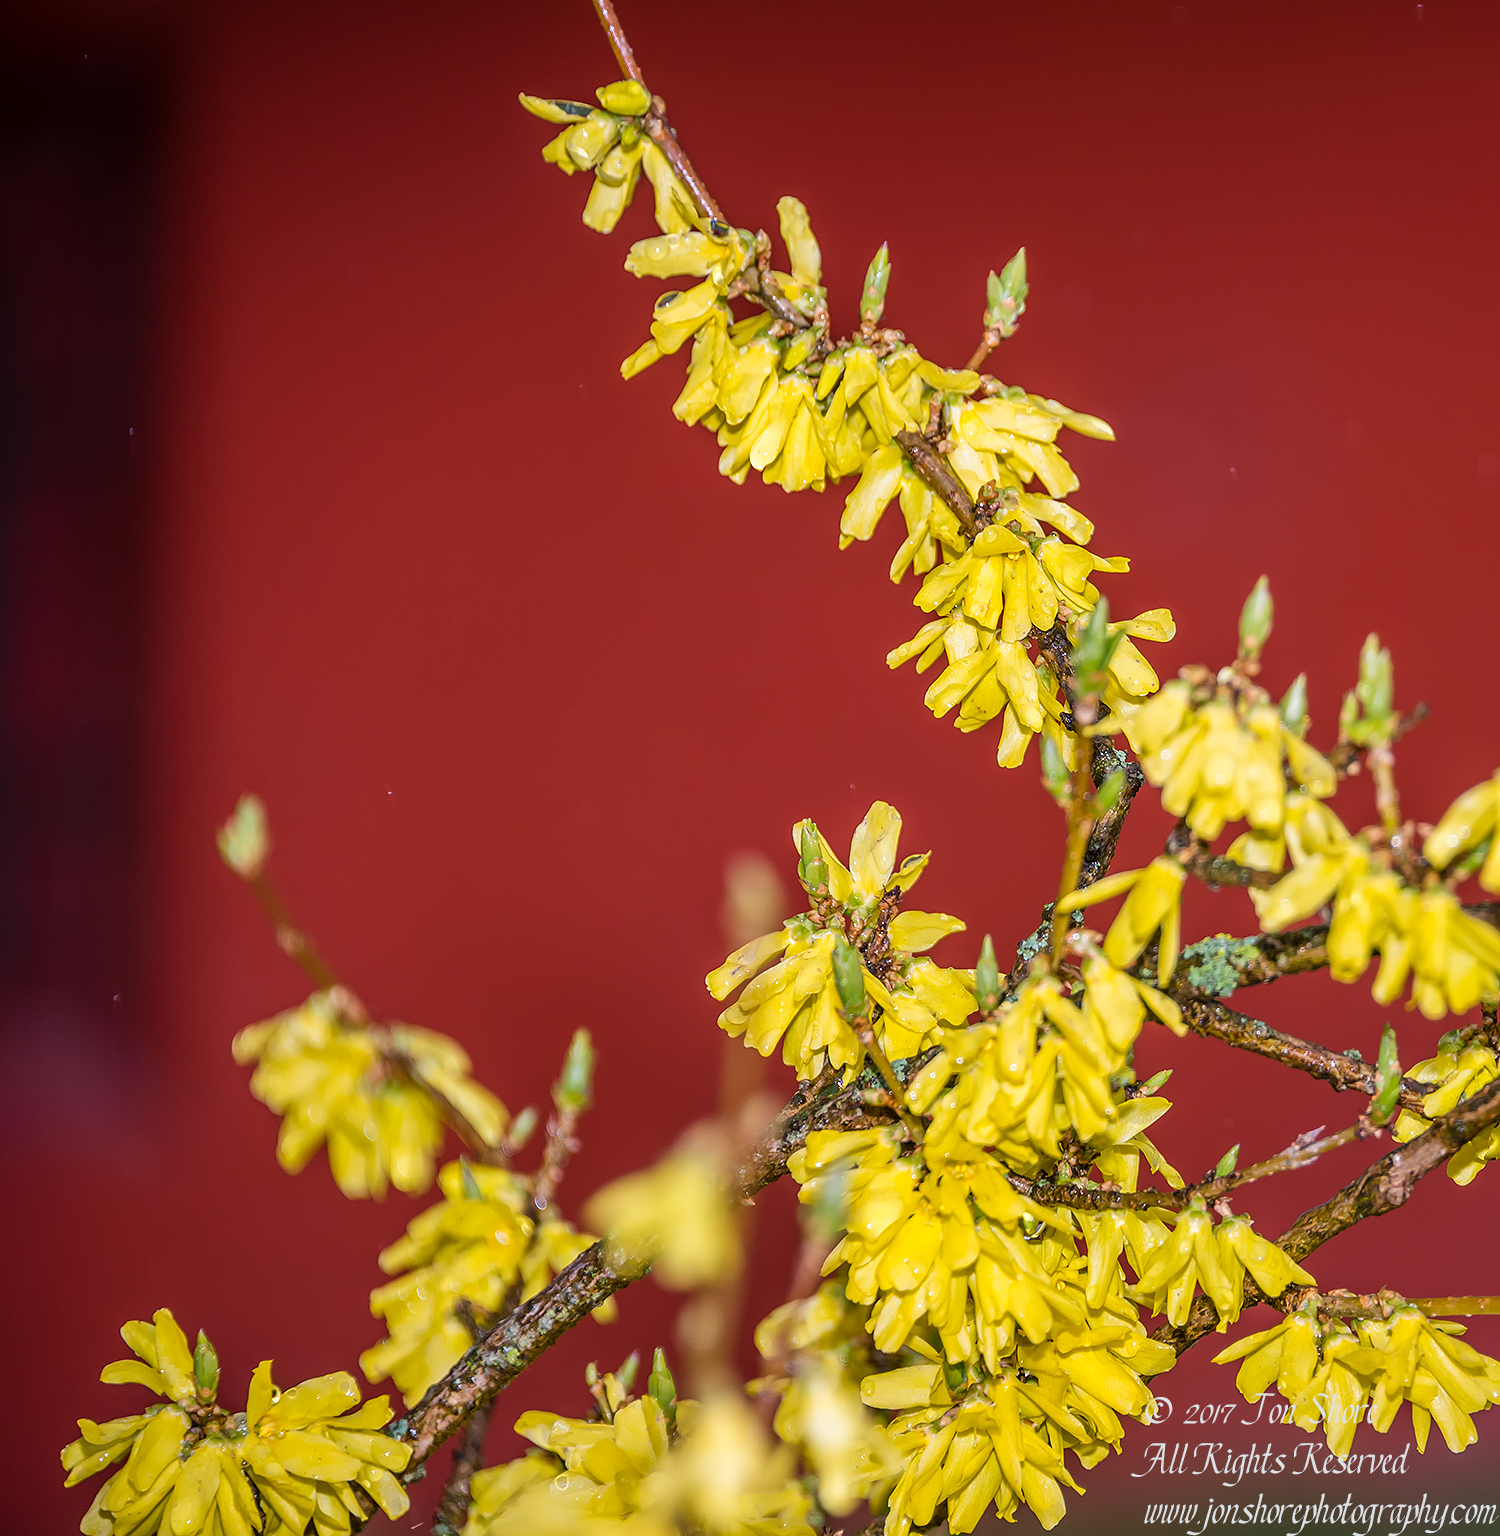 Yellow Blossoms on Red background Riga Latvia Spring 2017. Nikkor 200mm